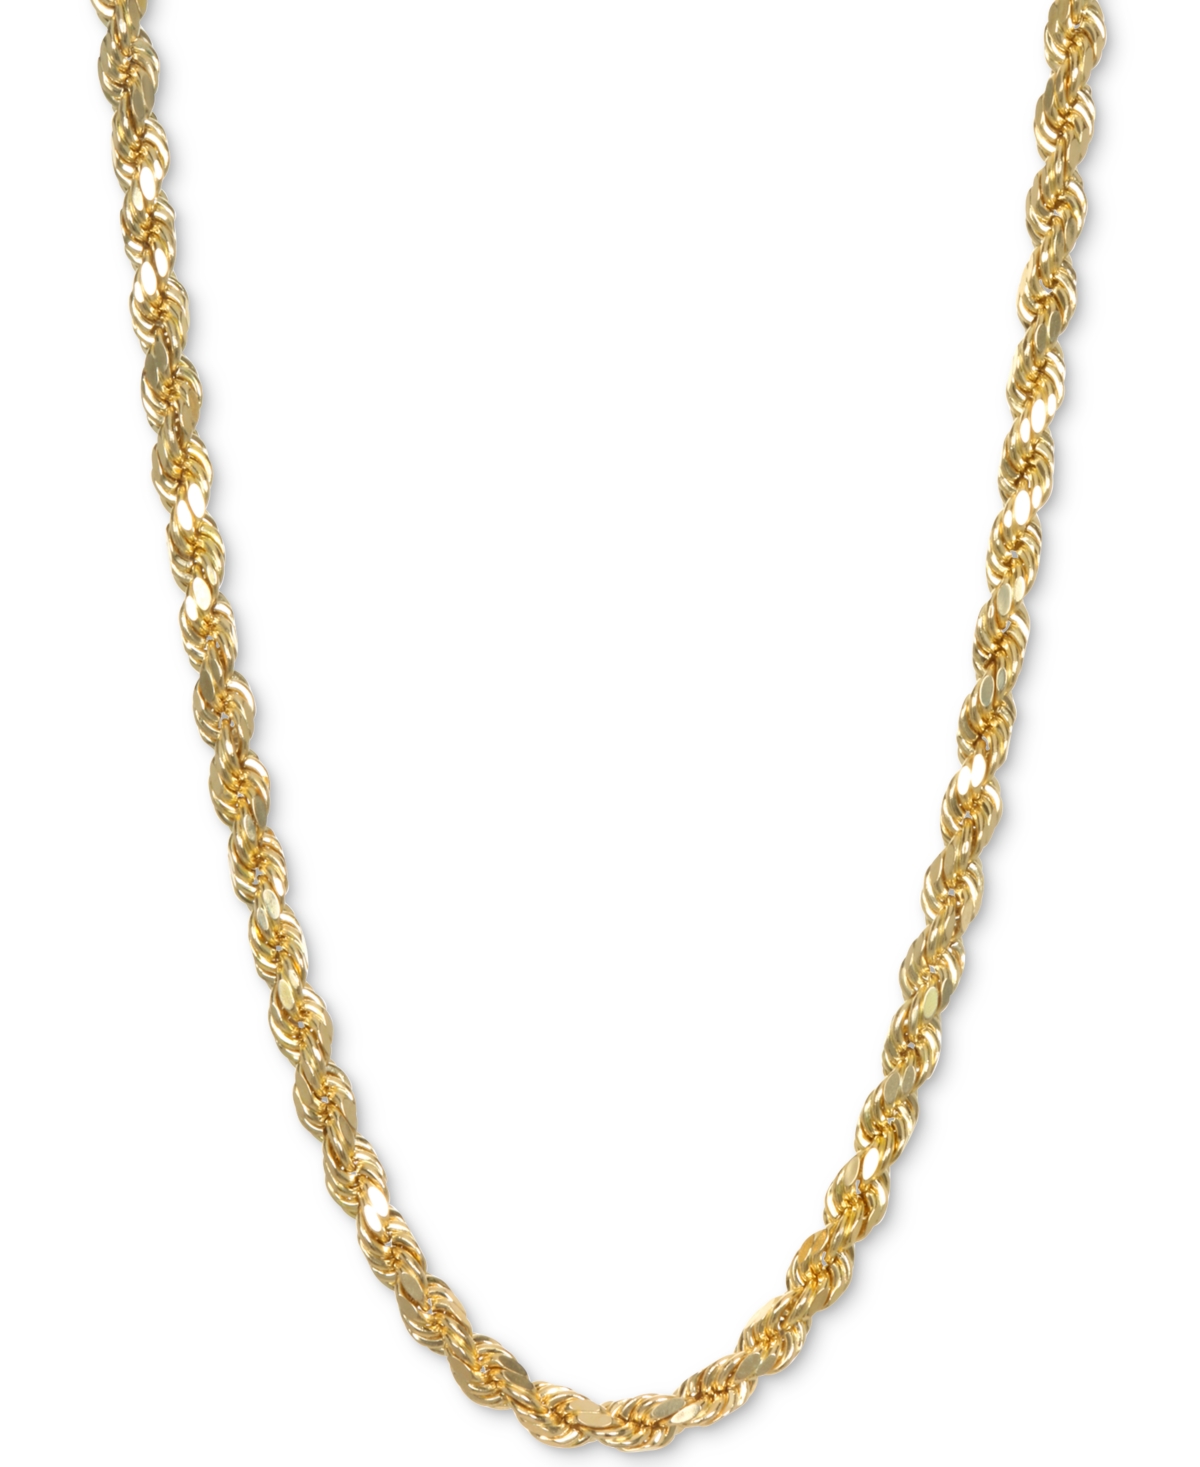 24" Rope Chain Necklace in 14k Gold - Yellow Gold